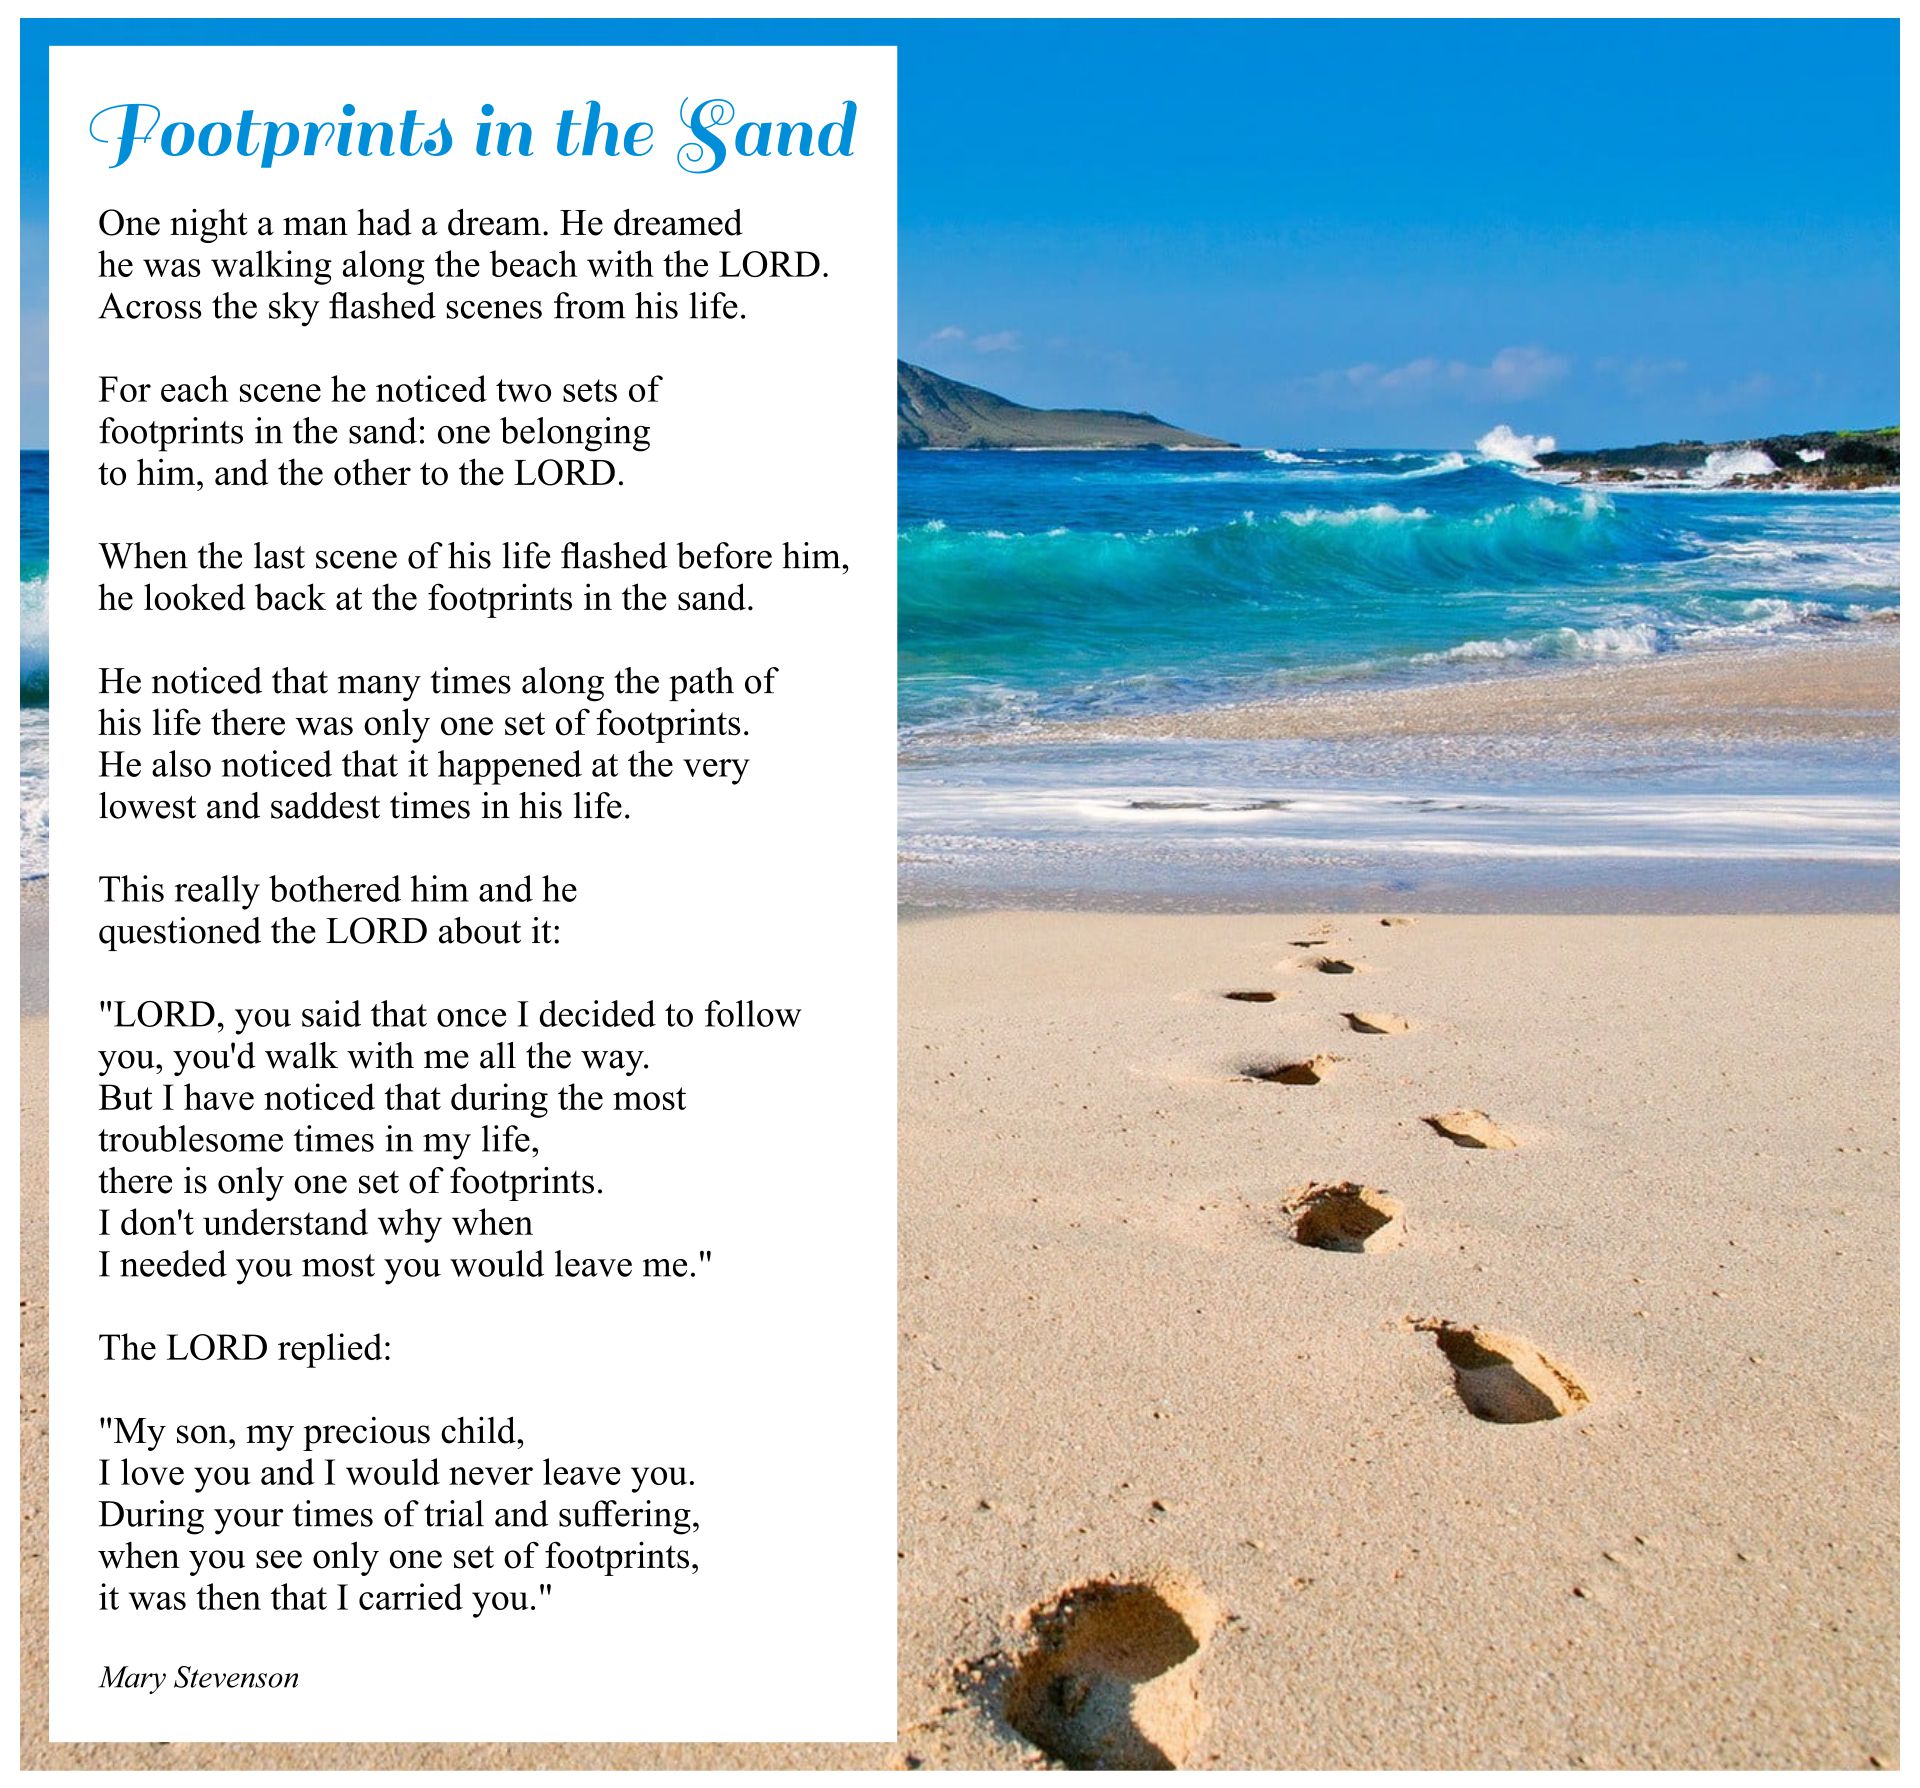 Footprints in the Sand Digital Print DIY Instant Download Frame Available